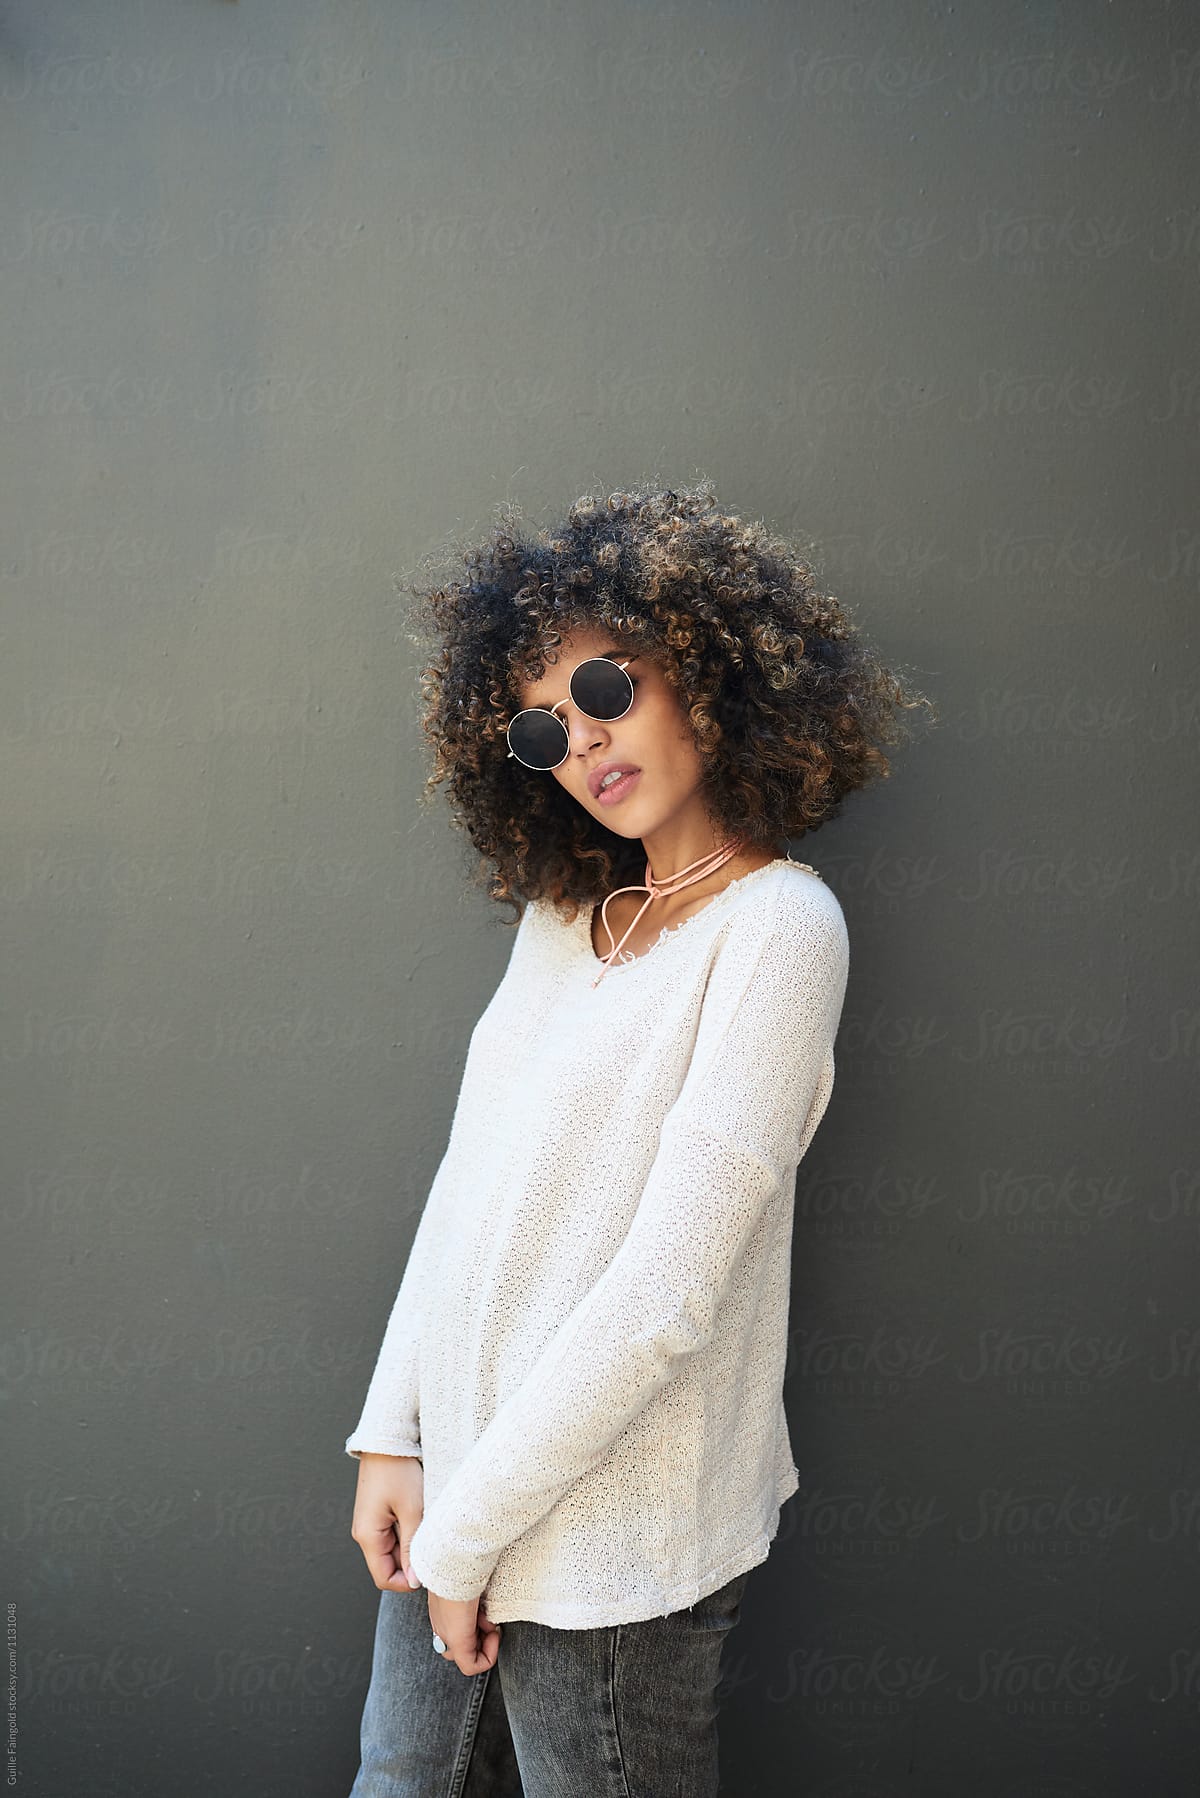 Stylish Brunette With Afro In Round Sunglasses By Stocksy Contributor Guille Faingold Stocksy